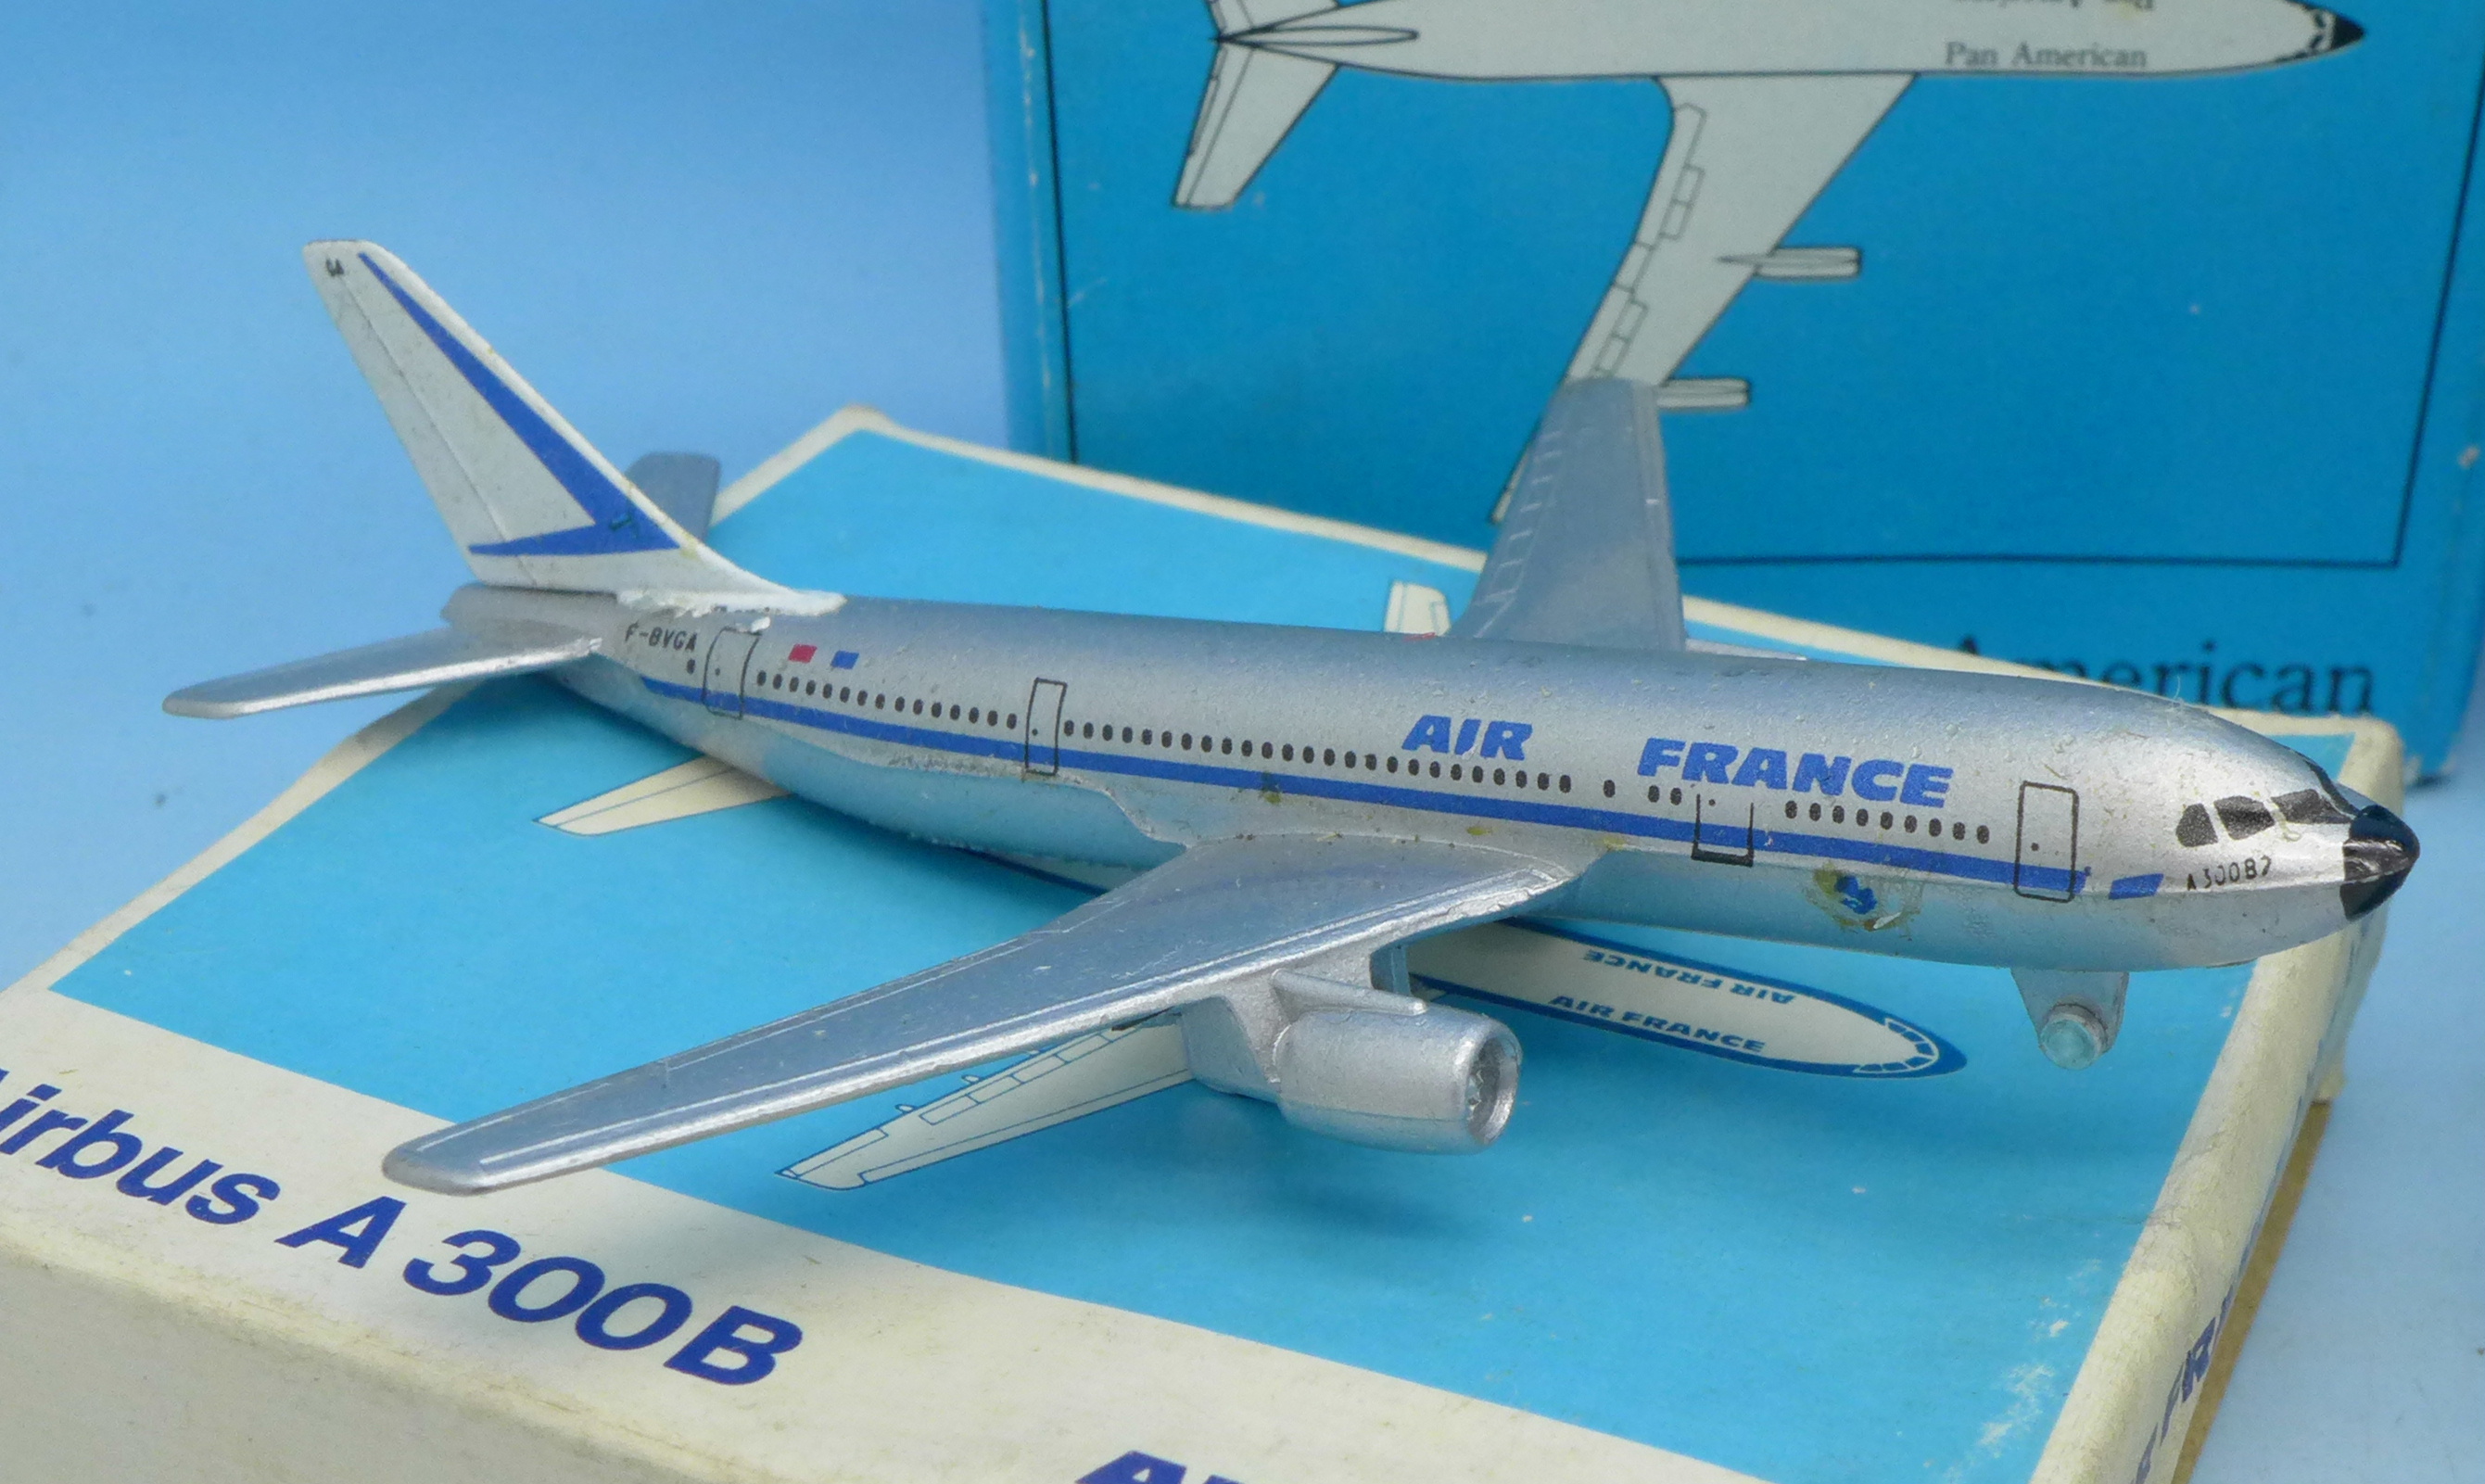 Eleven Schuco model airliners, - Image 3 of 3